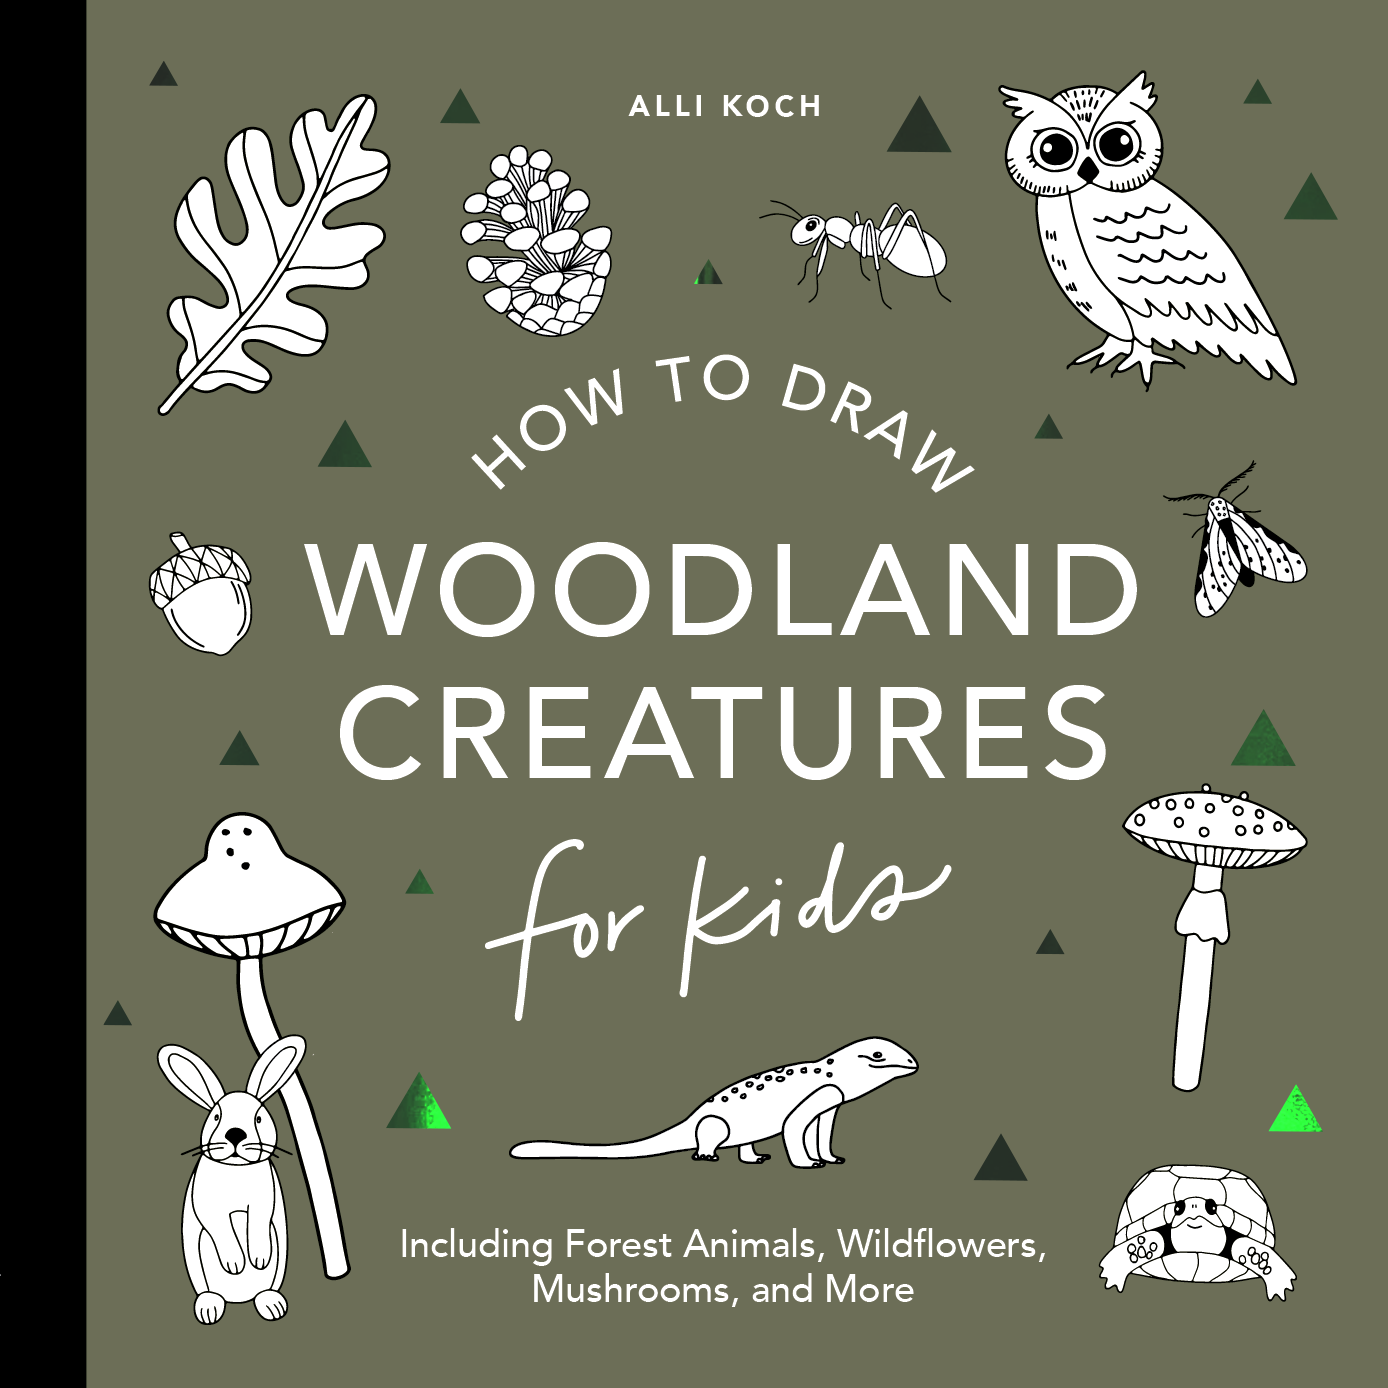 How to Draw for Kids: Mushrooms & Woodland Creatures provides step-by-step drawing lessons for kids to develop their art skills and learn how to draw adorable woodland creatures.